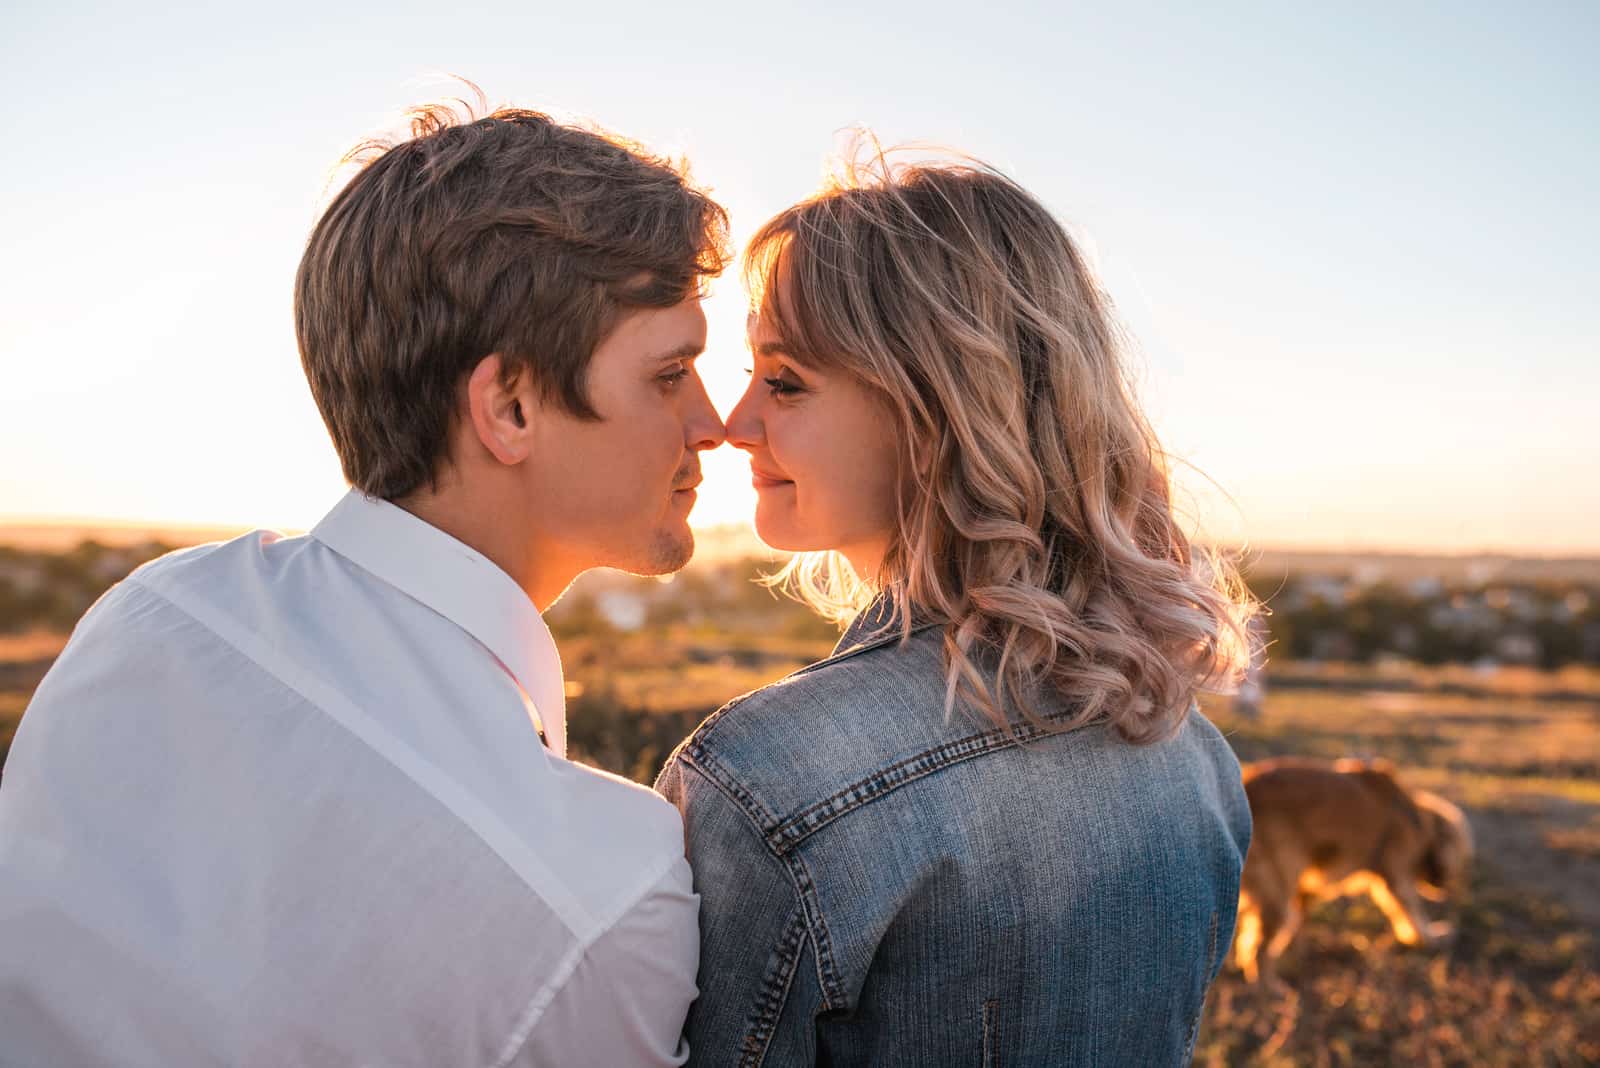 When A Capricorn Man Kisses You: 9 Hidden Meanings Of His Kiss